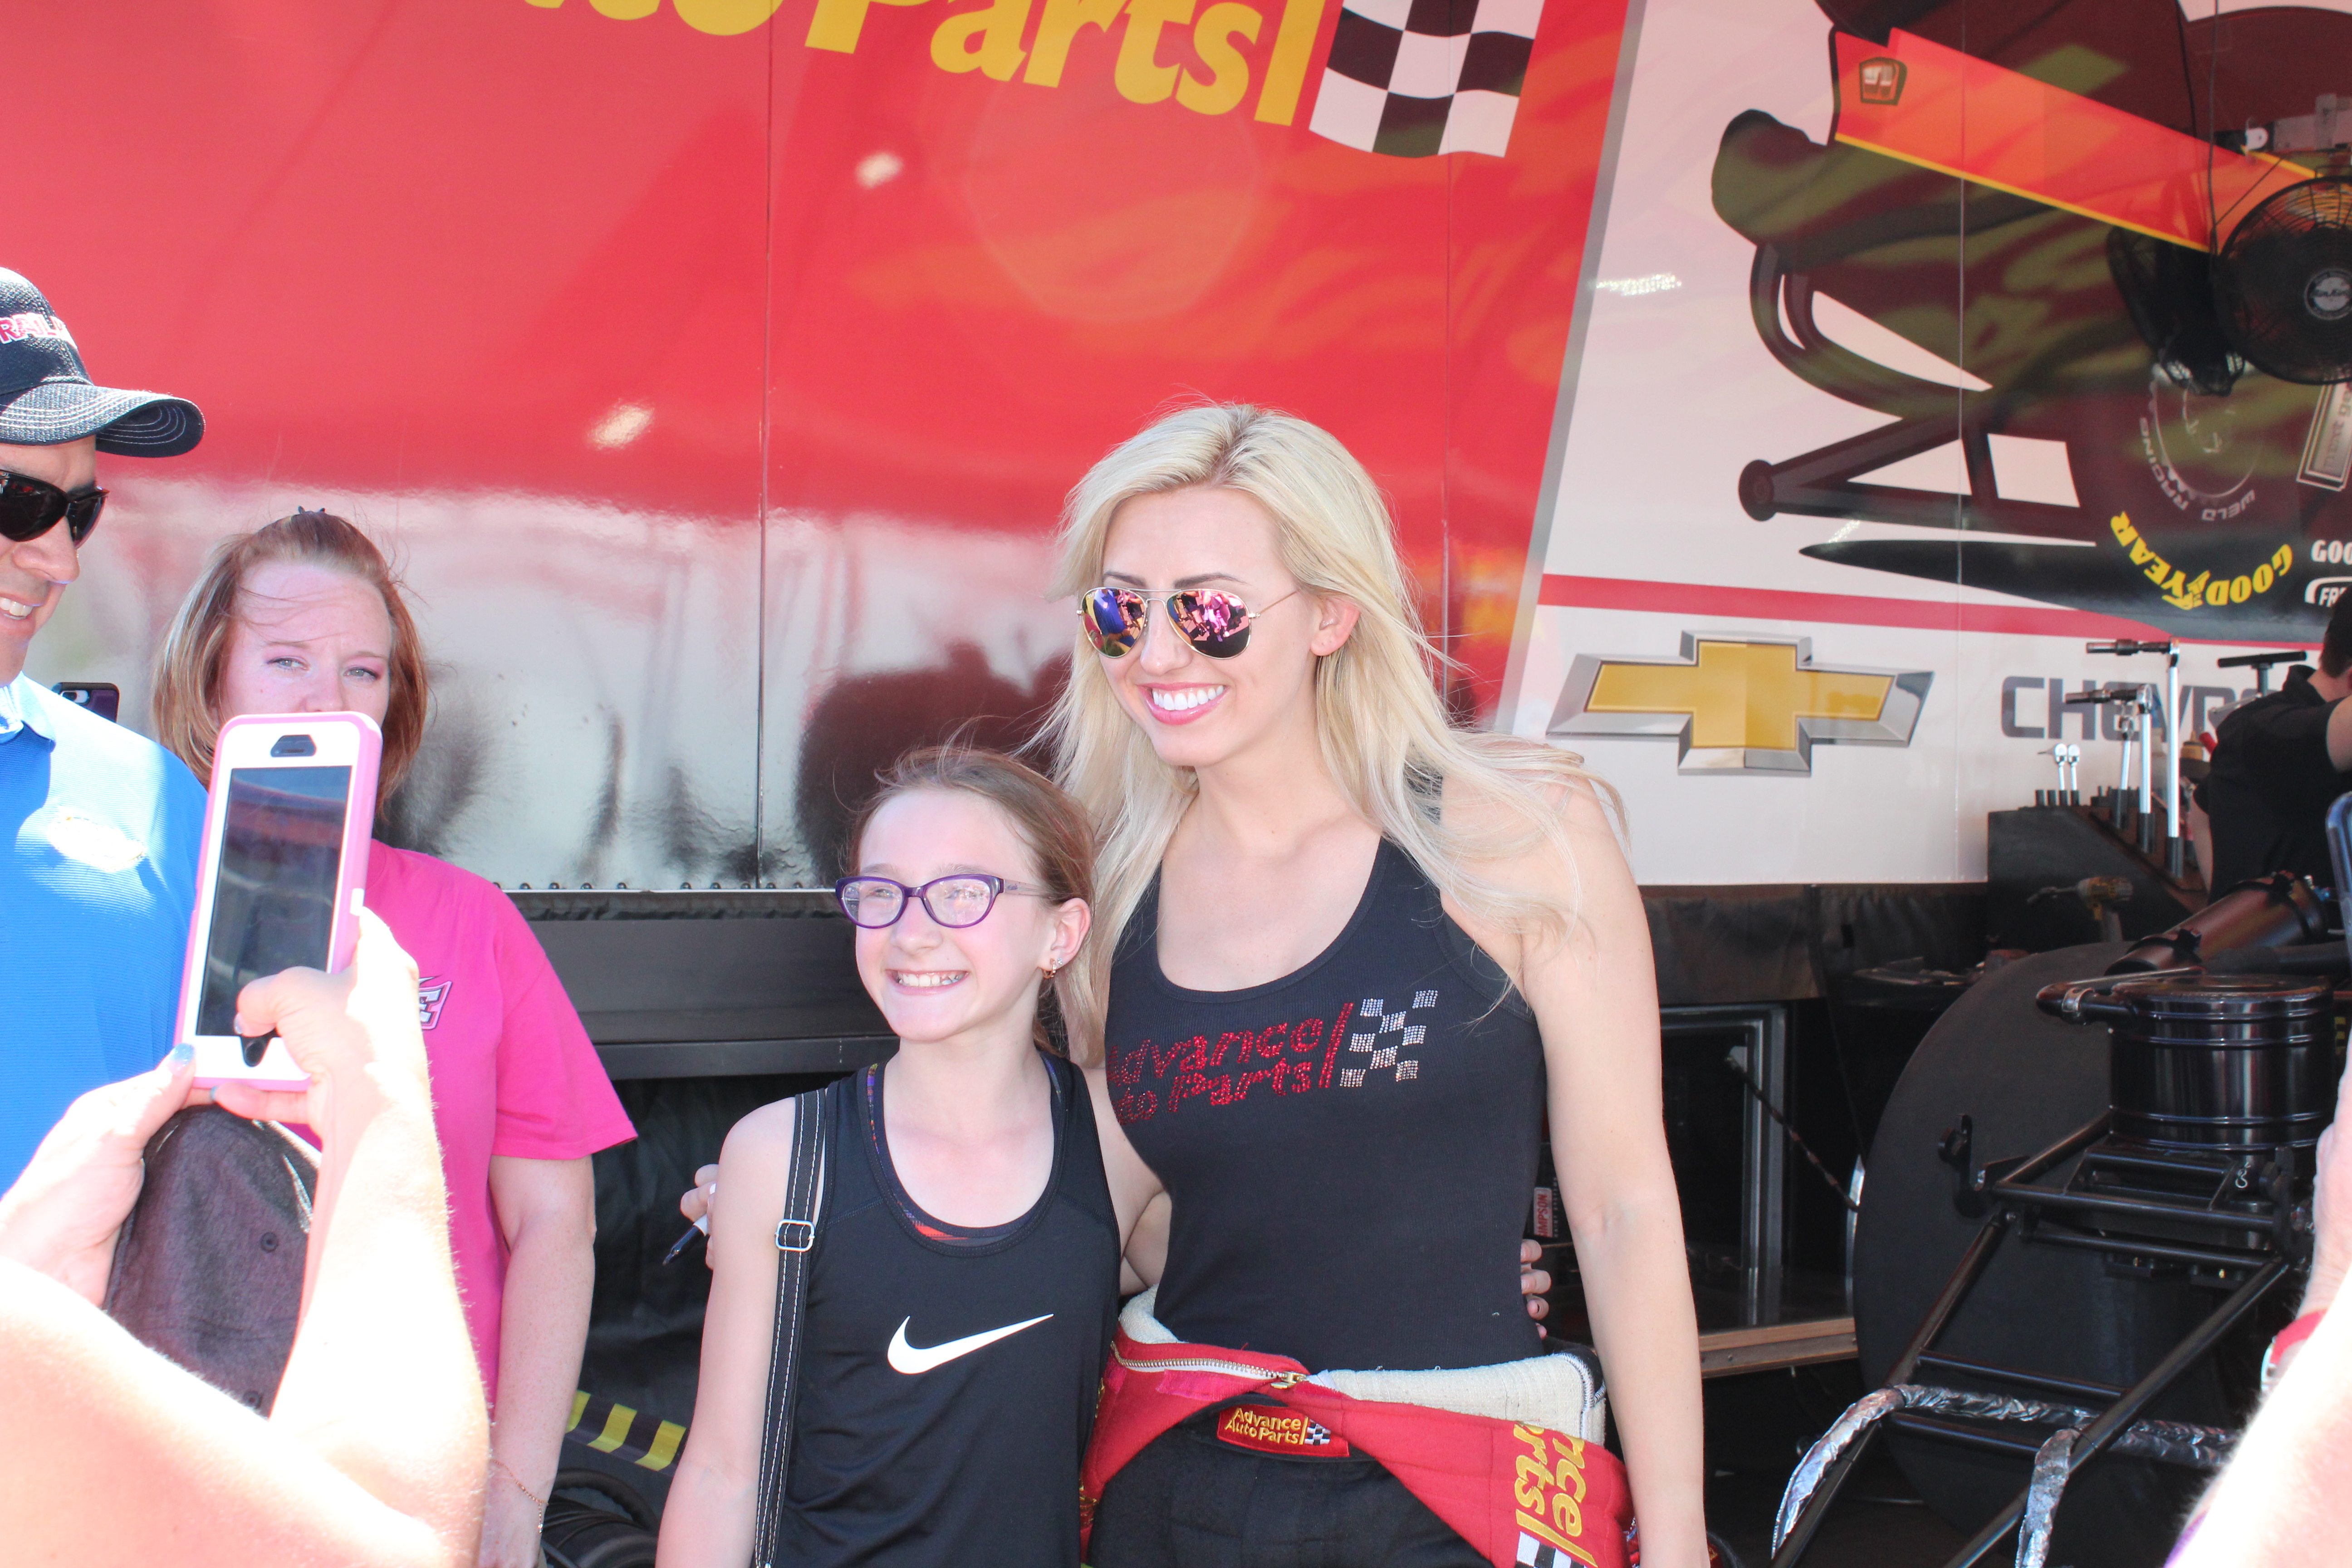 Moreover, Force understands and appreciates her role as not only one of the top racers in the NHRA, but as a role model to young fans. (Photo Credit: Jose L. Acero Jr/TPF)